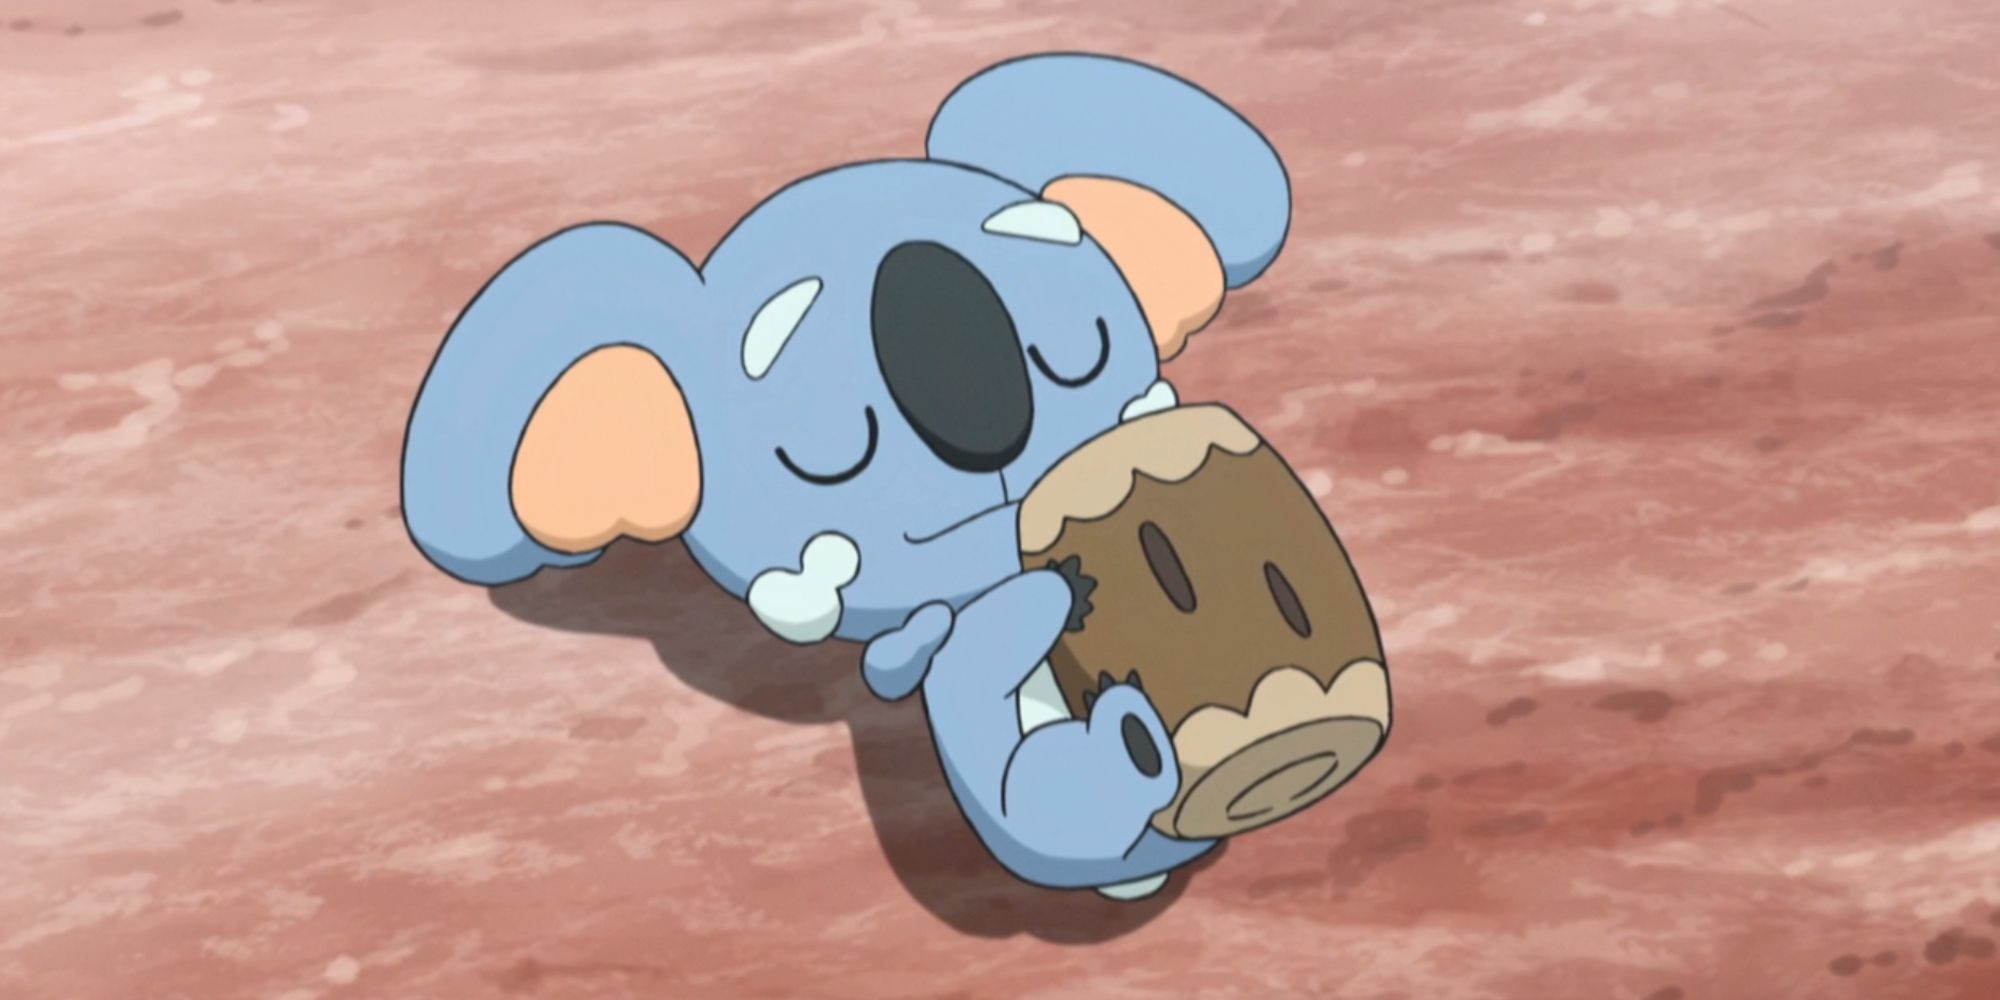 A Komala sleeping on the ground in the anime